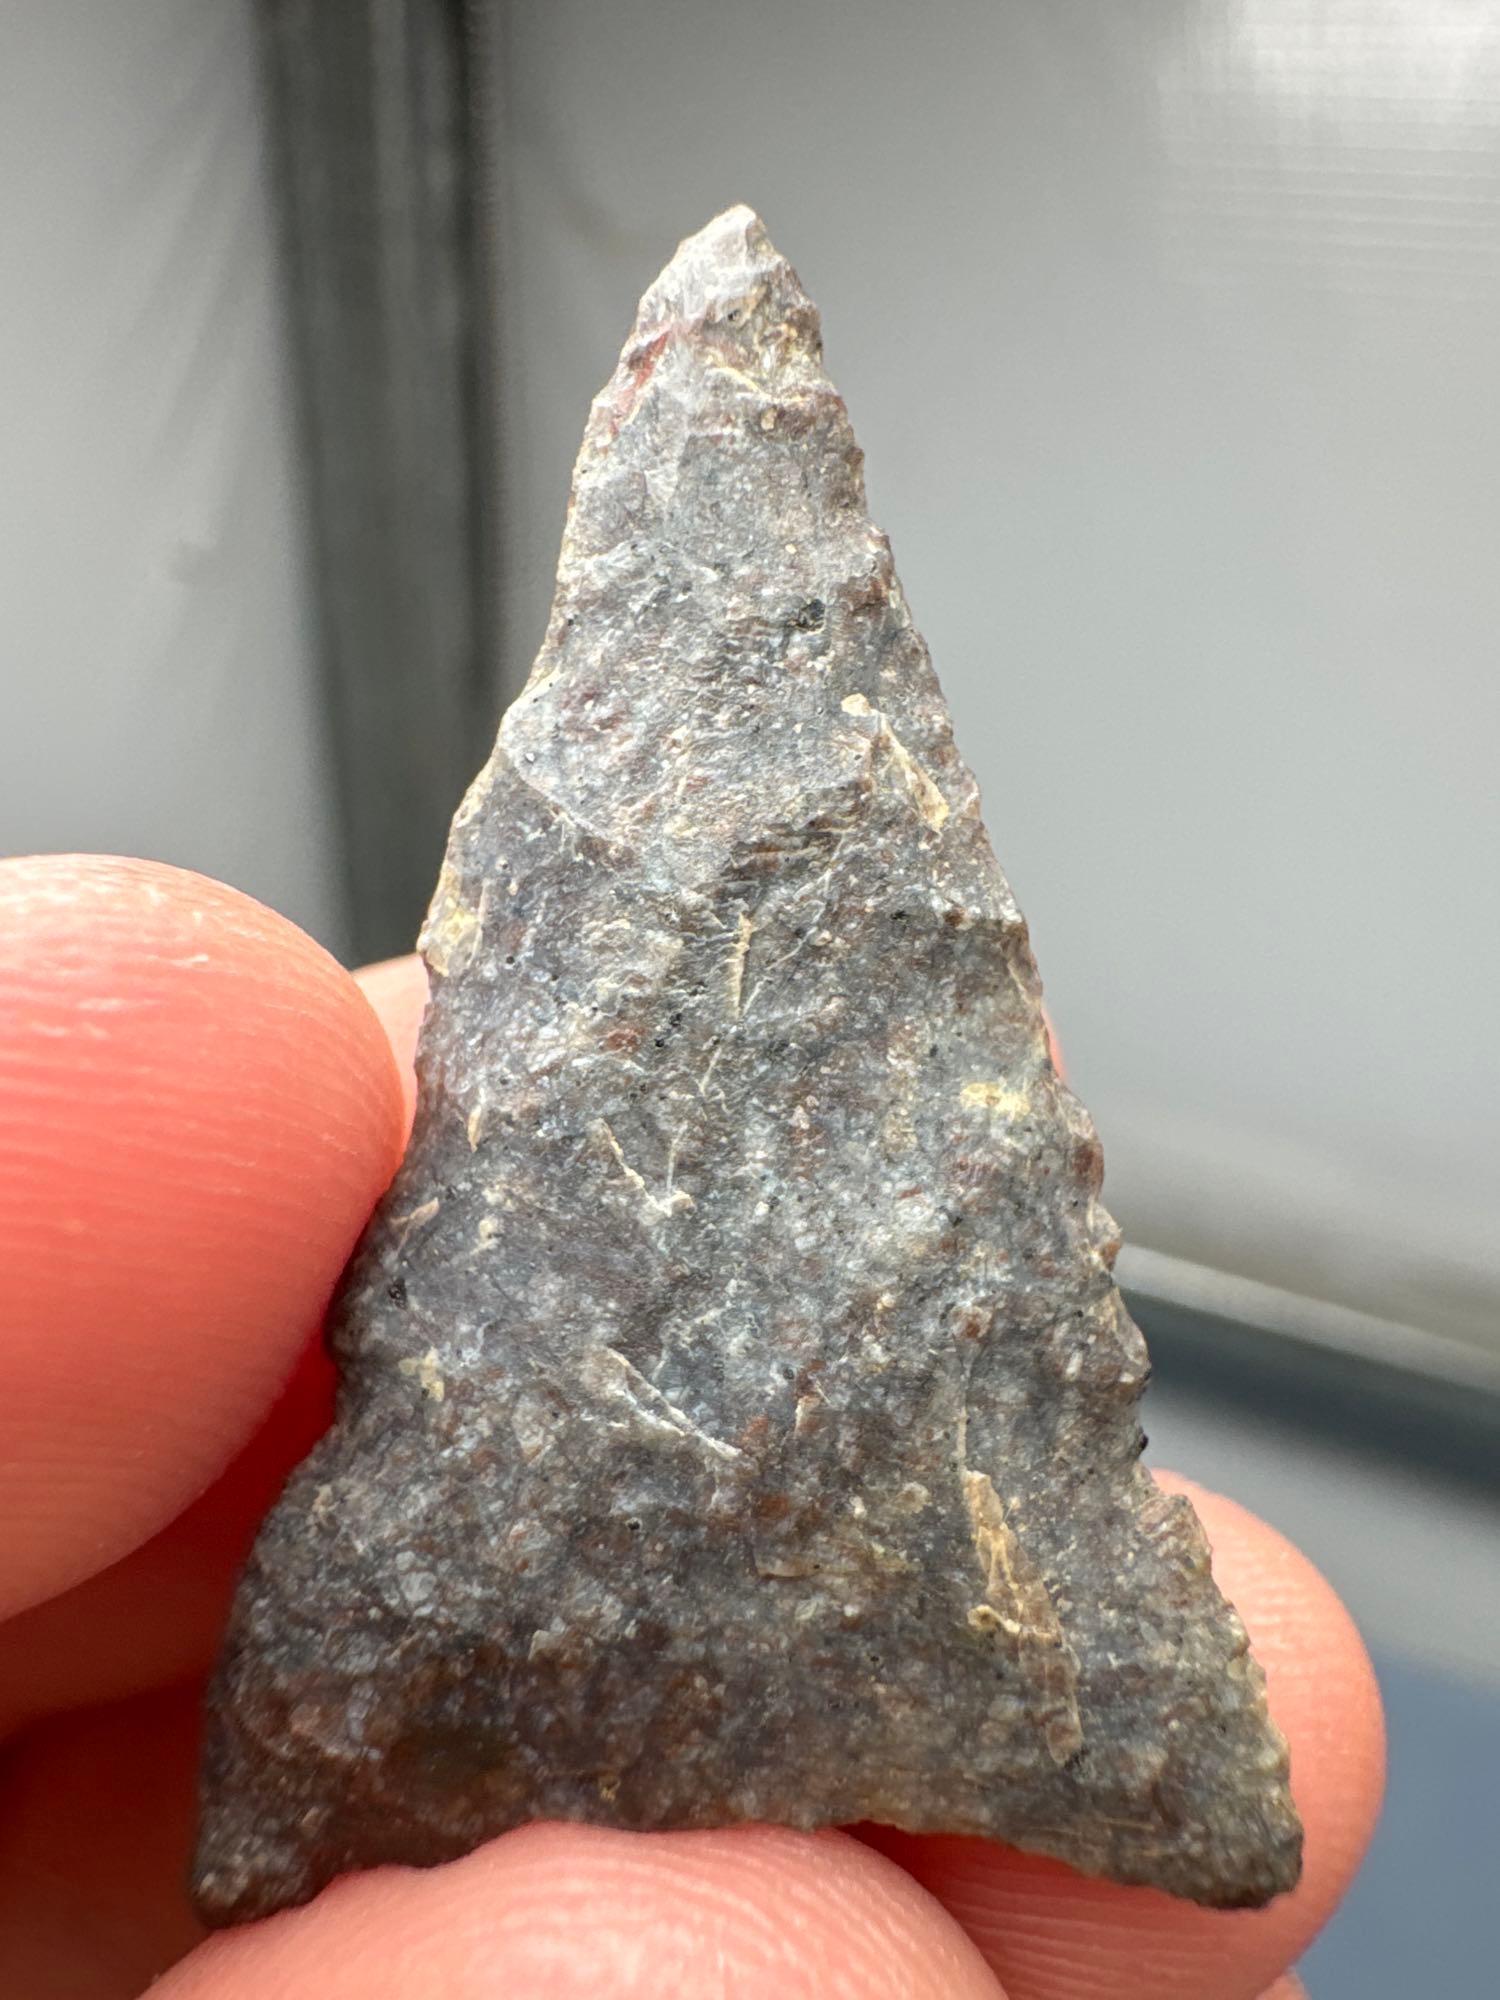 Fine 1 1/2" Triangle Point, Found in Burlington Co., New Jersey, Purchased from Rich Johnston